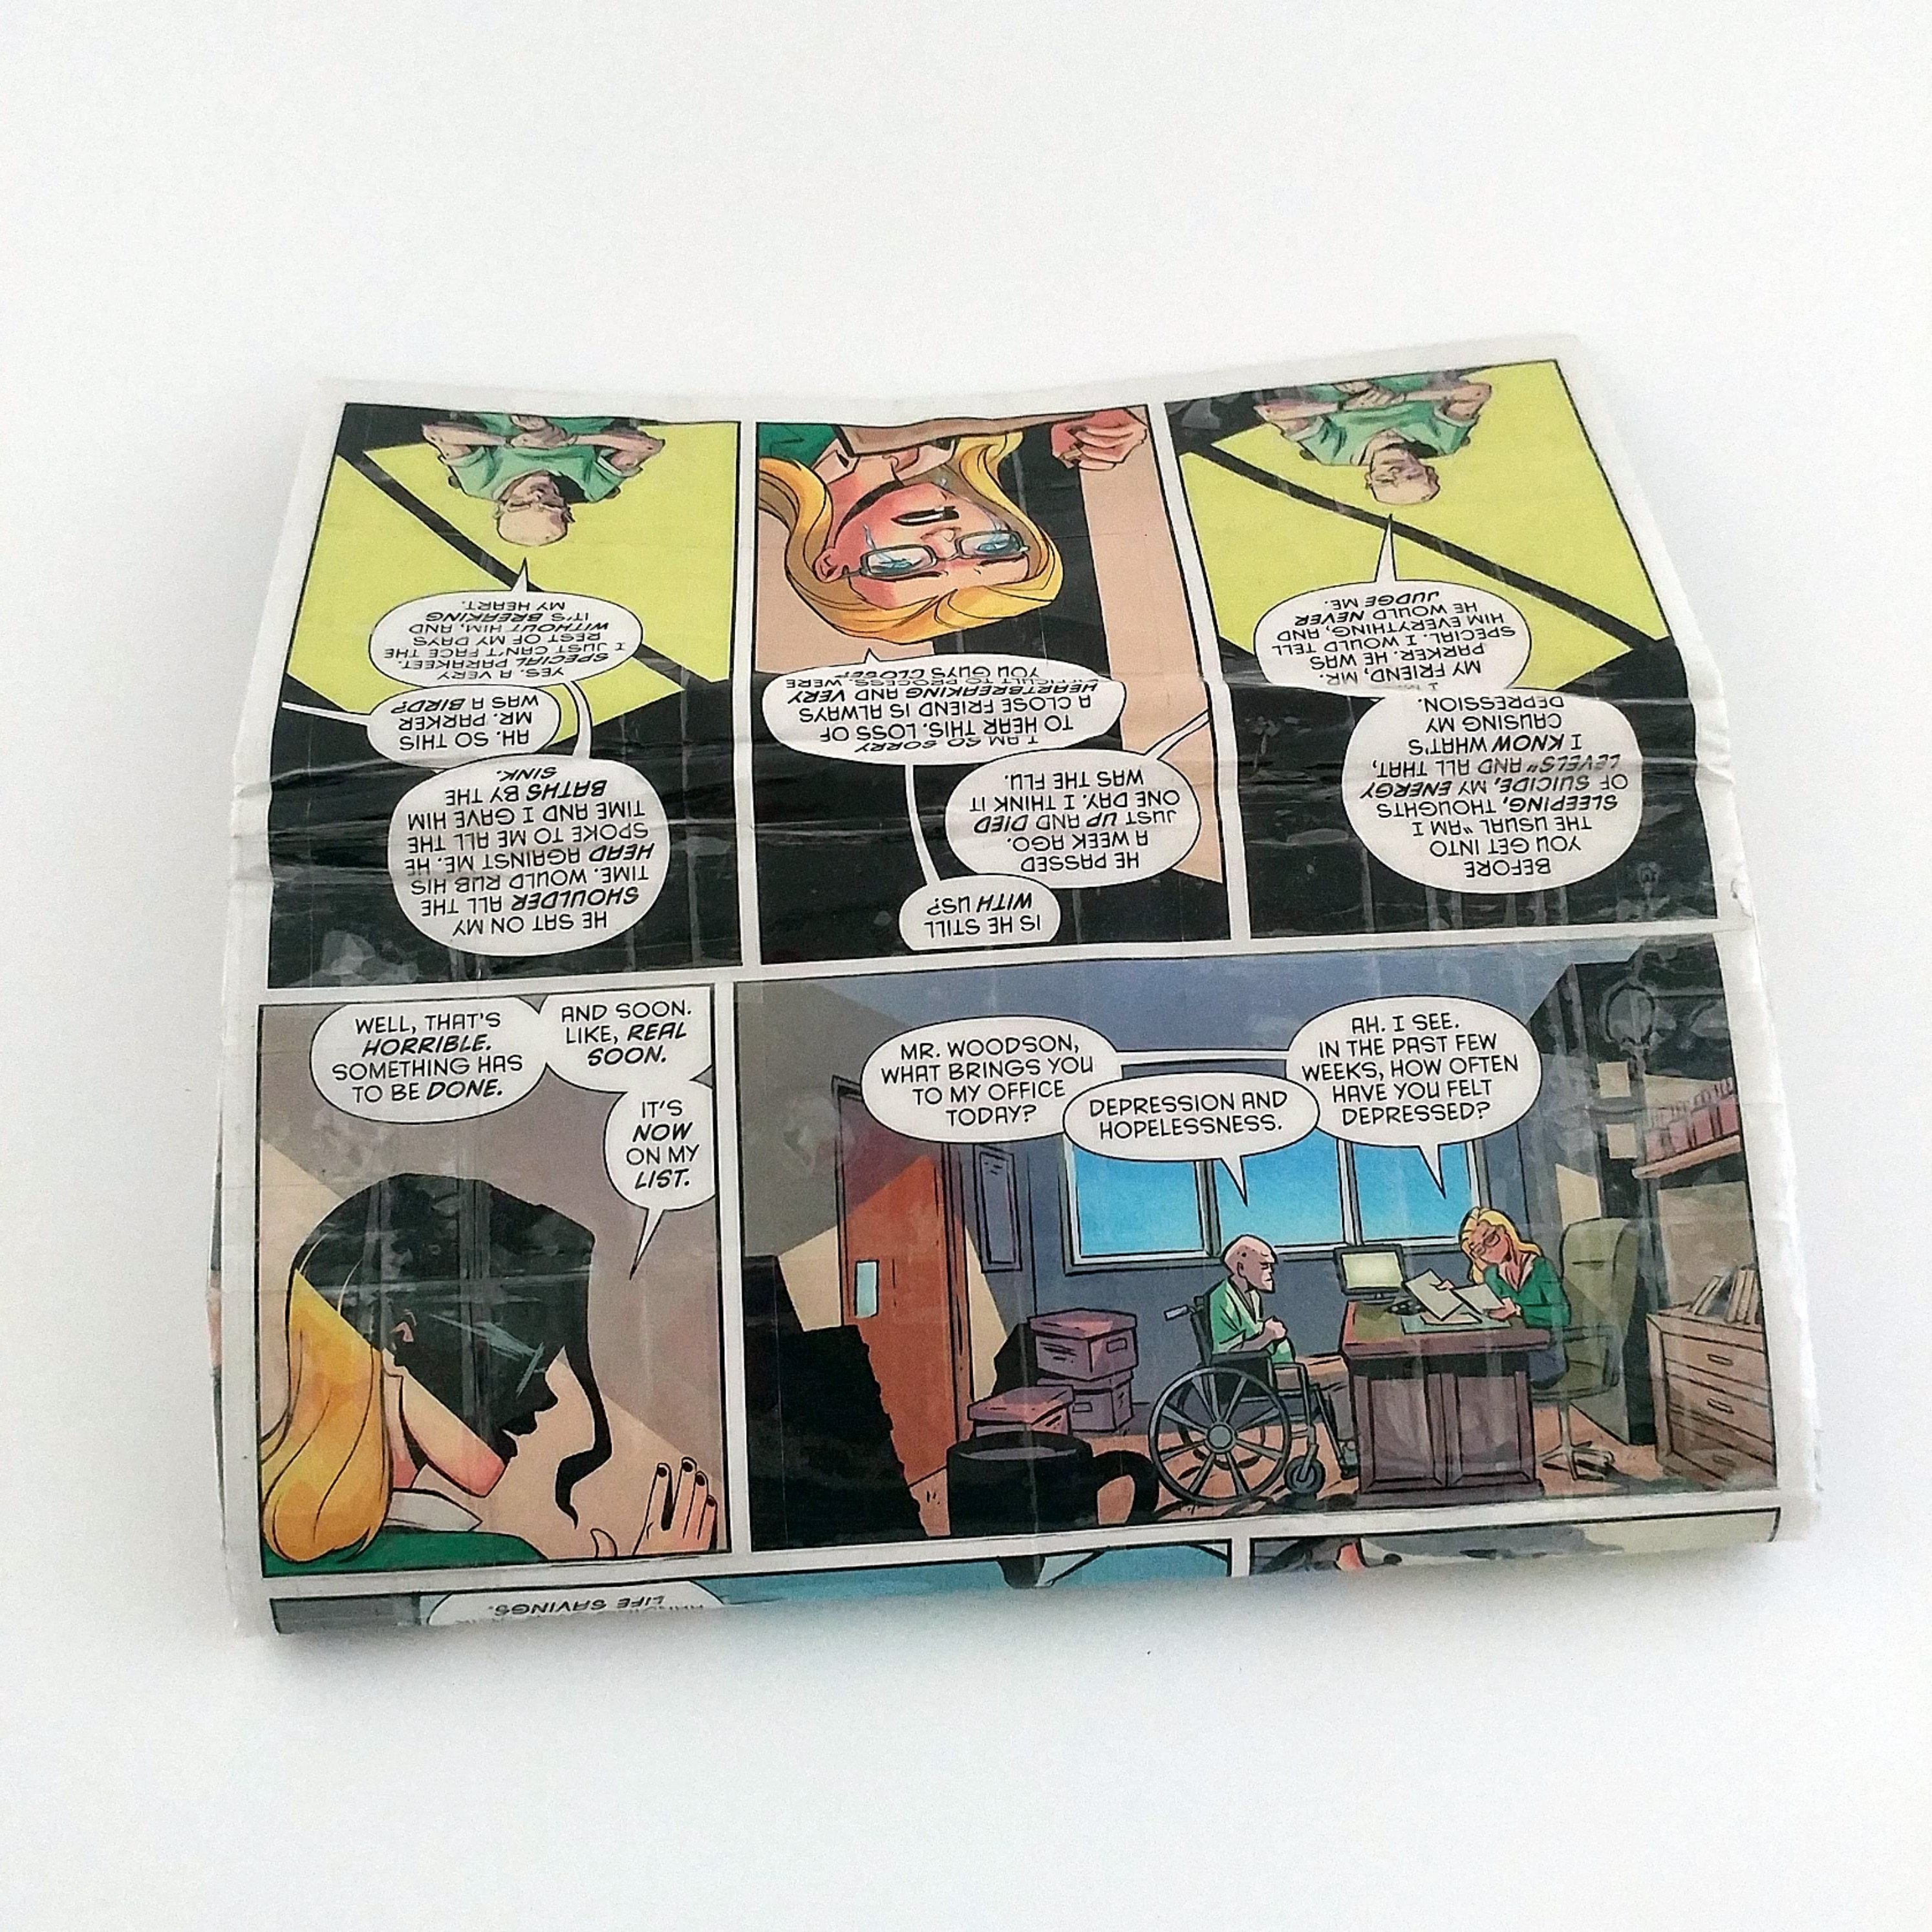 Dr. Harleen Quinzel aka Harley Quinn long clutch style women's wallet made from a Harley Quinn comic book. 